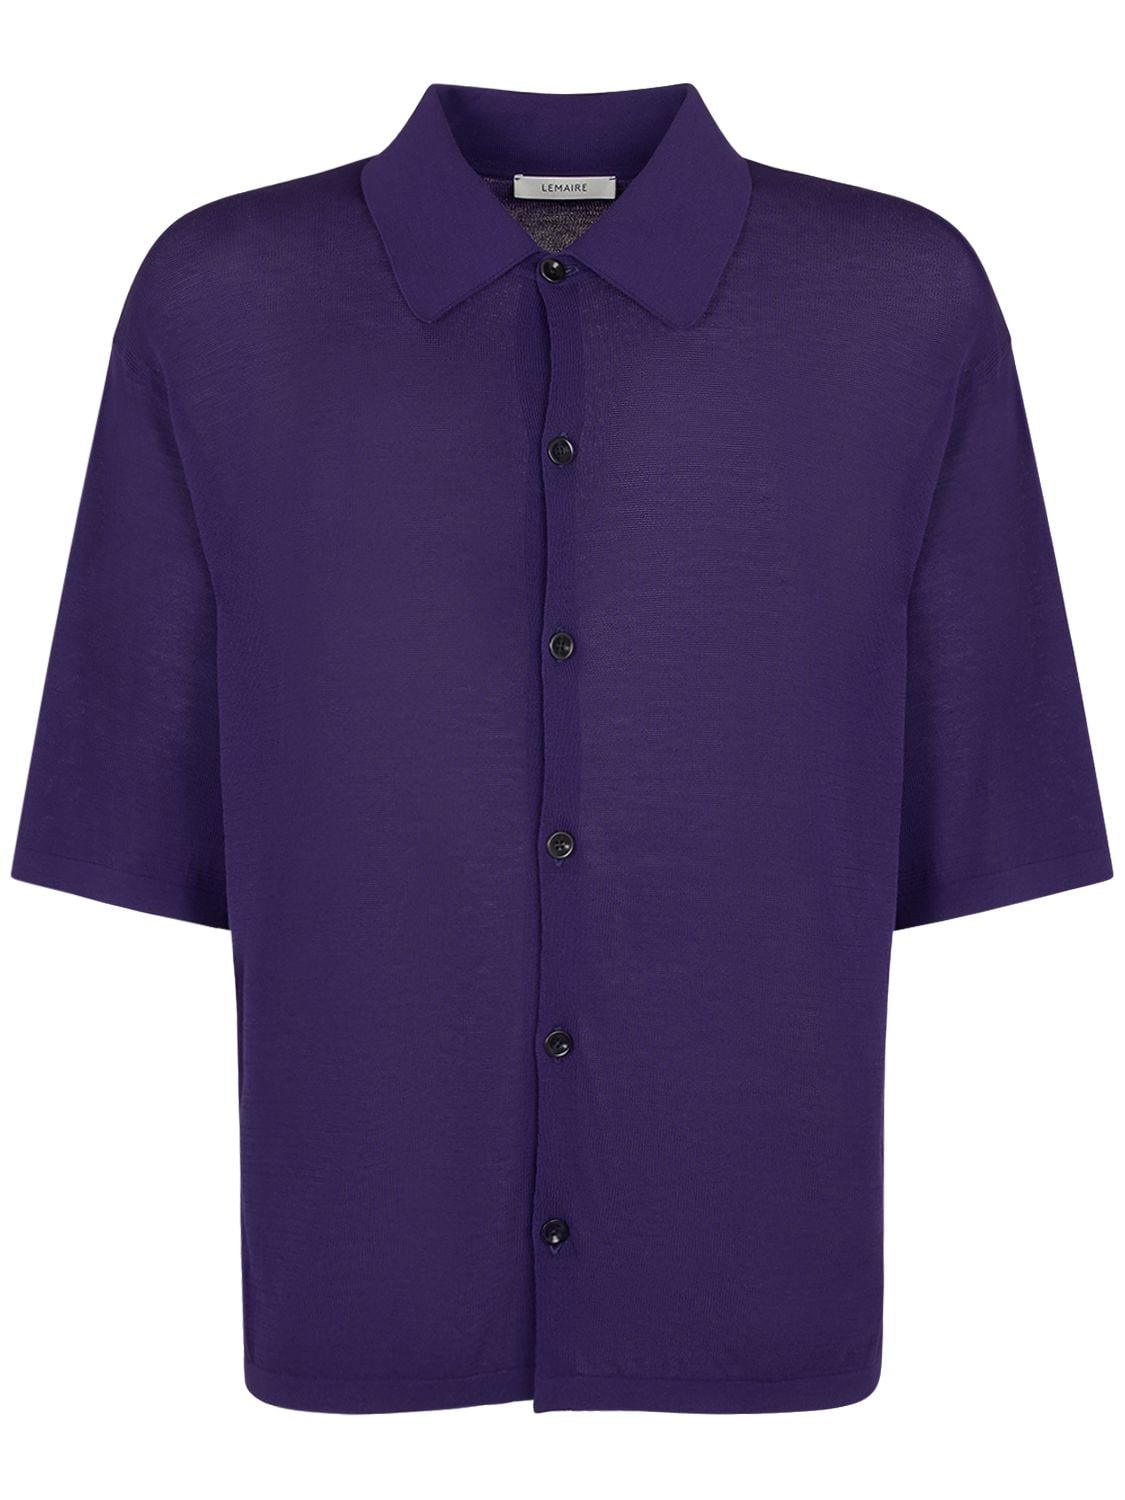 Image of Cotton Knit S/s Polo Shirt